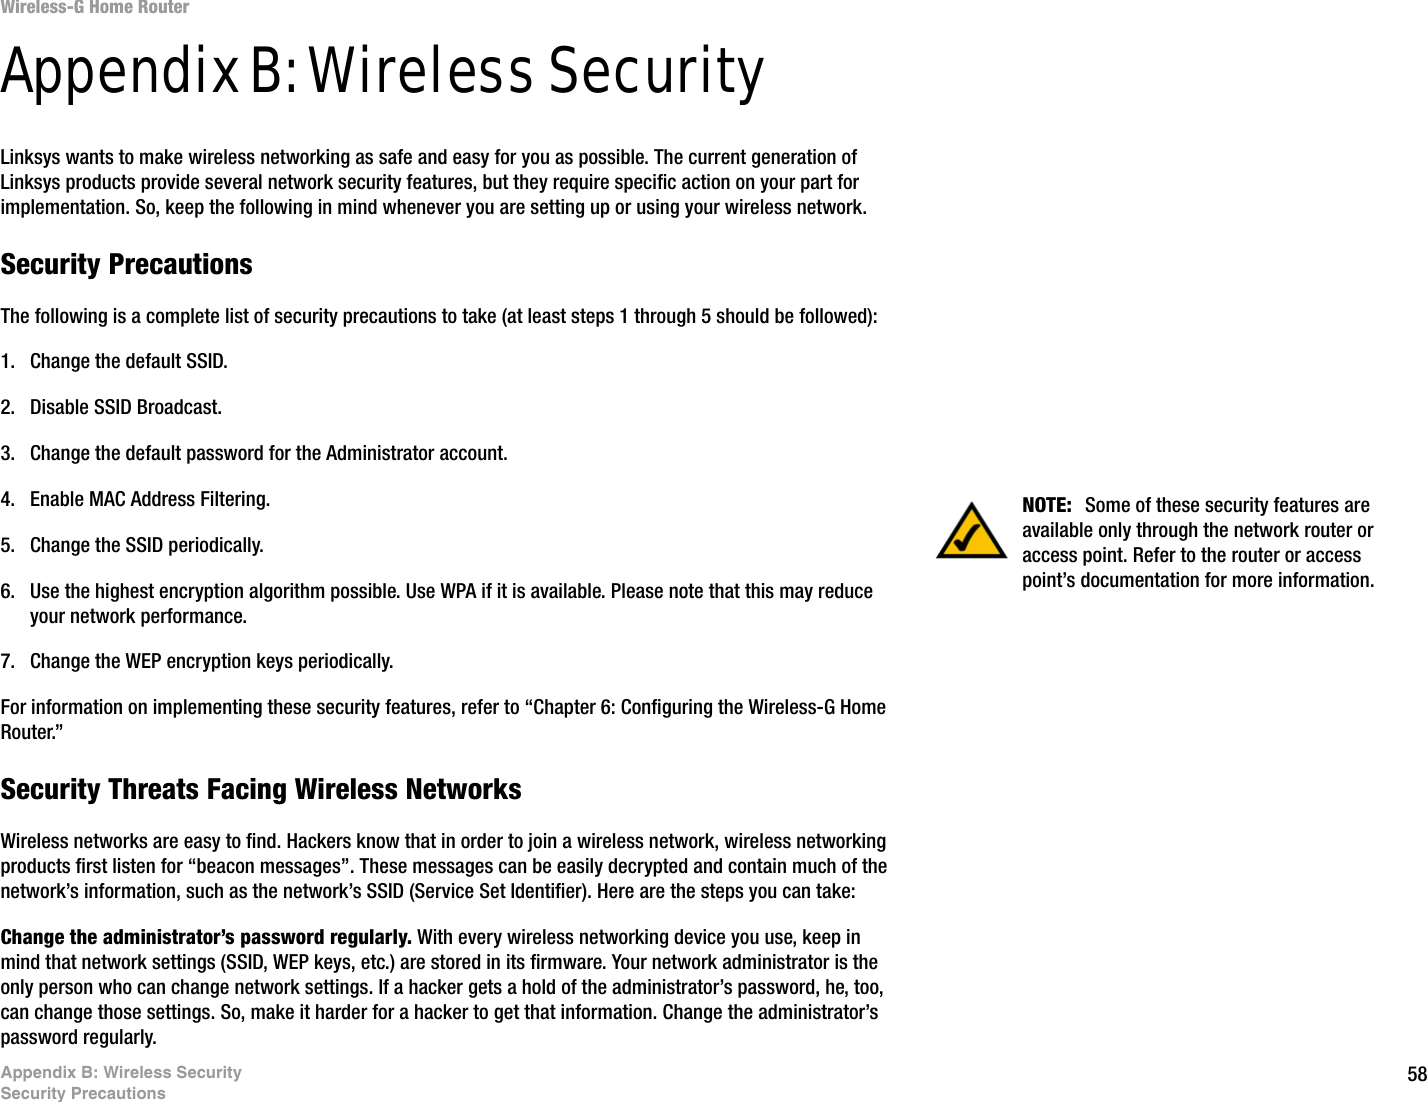 58Appendix B: Wireless SecuritySecurity PrecautionsWireless-G Home RouterAppendix B: Wireless SecurityLinksys wants to make wireless networking as safe and easy for you as possible. The current generation of Linksys products provide several network security features, but they require specific action on your part for implementation. So, keep the following in mind whenever you are setting up or using your wireless network.Security PrecautionsThe following is a complete list of security precautions to take (at least steps 1 through 5 should be followed):1. Change the default SSID. 2. Disable SSID Broadcast. 3. Change the default password for the Administrator account. 4. Enable MAC Address Filtering. 5. Change the SSID periodically. 6. Use the highest encryption algorithm possible. Use WPA if it is available. Please note that this may reduce your network performance. 7. Change the WEP encryption keys periodically. For information on implementing these security features, refer to “Chapter 6: Configuring the Wireless-G Home Router.”Security Threats Facing Wireless Networks Wireless networks are easy to find. Hackers know that in order to join a wireless network, wireless networking products first listen for “beacon messages”. These messages can be easily decrypted and contain much of the network’s information, such as the network’s SSID (Service Set Identifier). Here are the steps you can take:Change the administrator’s password regularly. With every wireless networking device you use, keep in mind that network settings (SSID, WEP keys, etc.) are stored in its firmware. Your network administrator is the only person who can change network settings. If a hacker gets a hold of the administrator’s password, he, too, can change those settings. So, make it harder for a hacker to get that information. Change the administrator’s password regularly.NOTE:  Some of these security features are available only through the network router or access point. Refer to the router or access point’s documentation for more information.